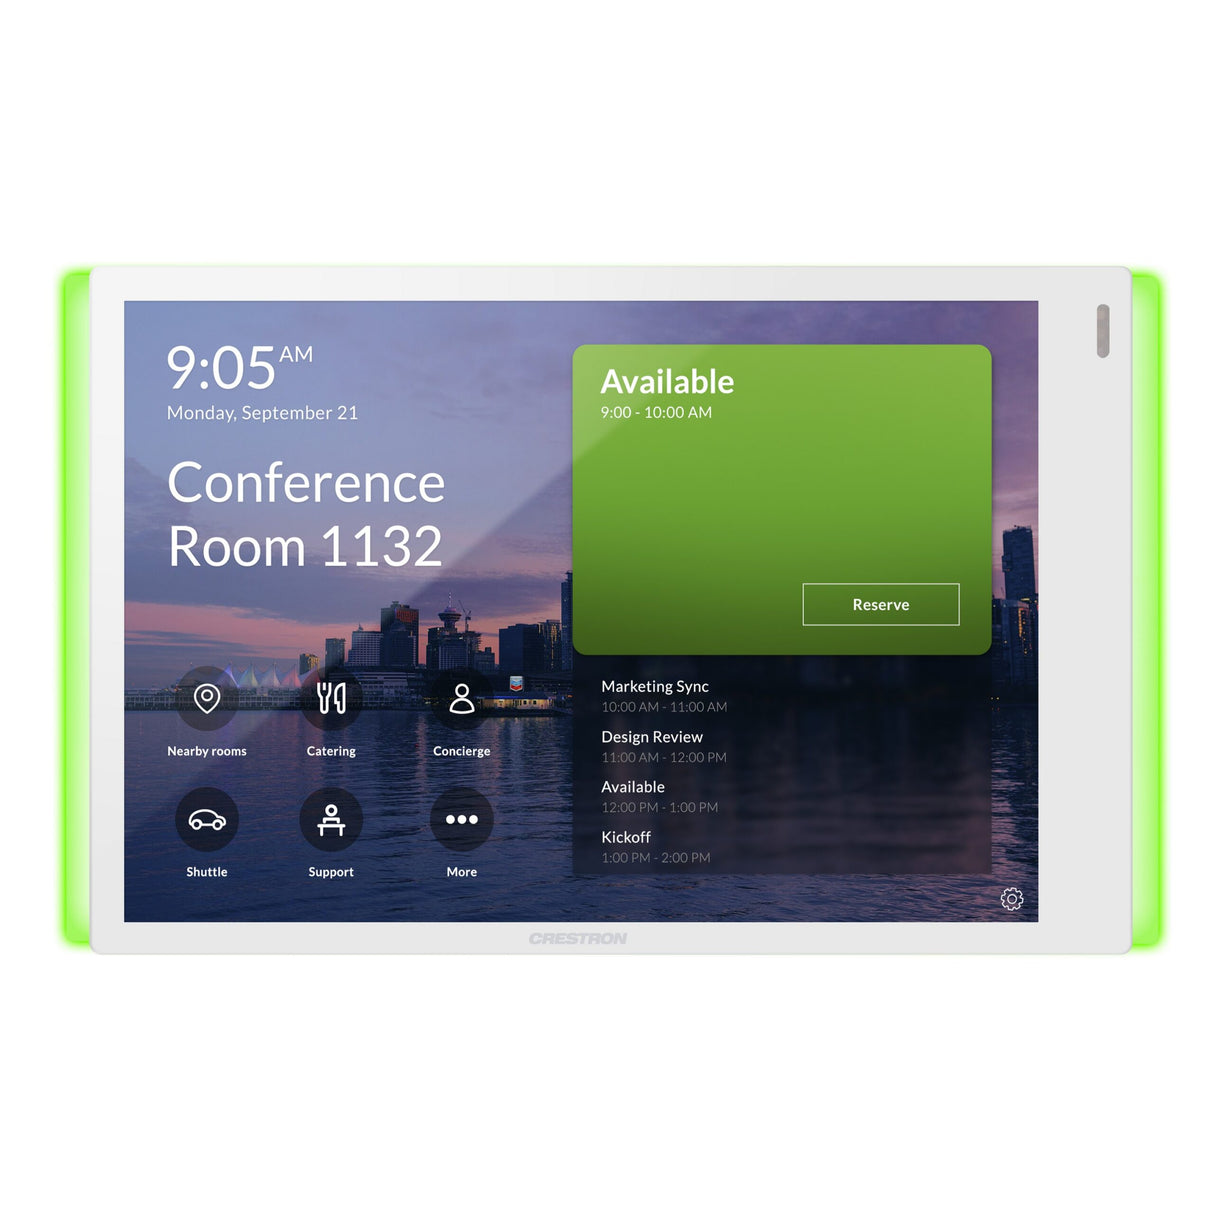 Crestron TSS-770-T-W-S-LB KIT 7-Inch Room Scheduling Touch Screen Display, Microsoft Teams, White, Light Bar